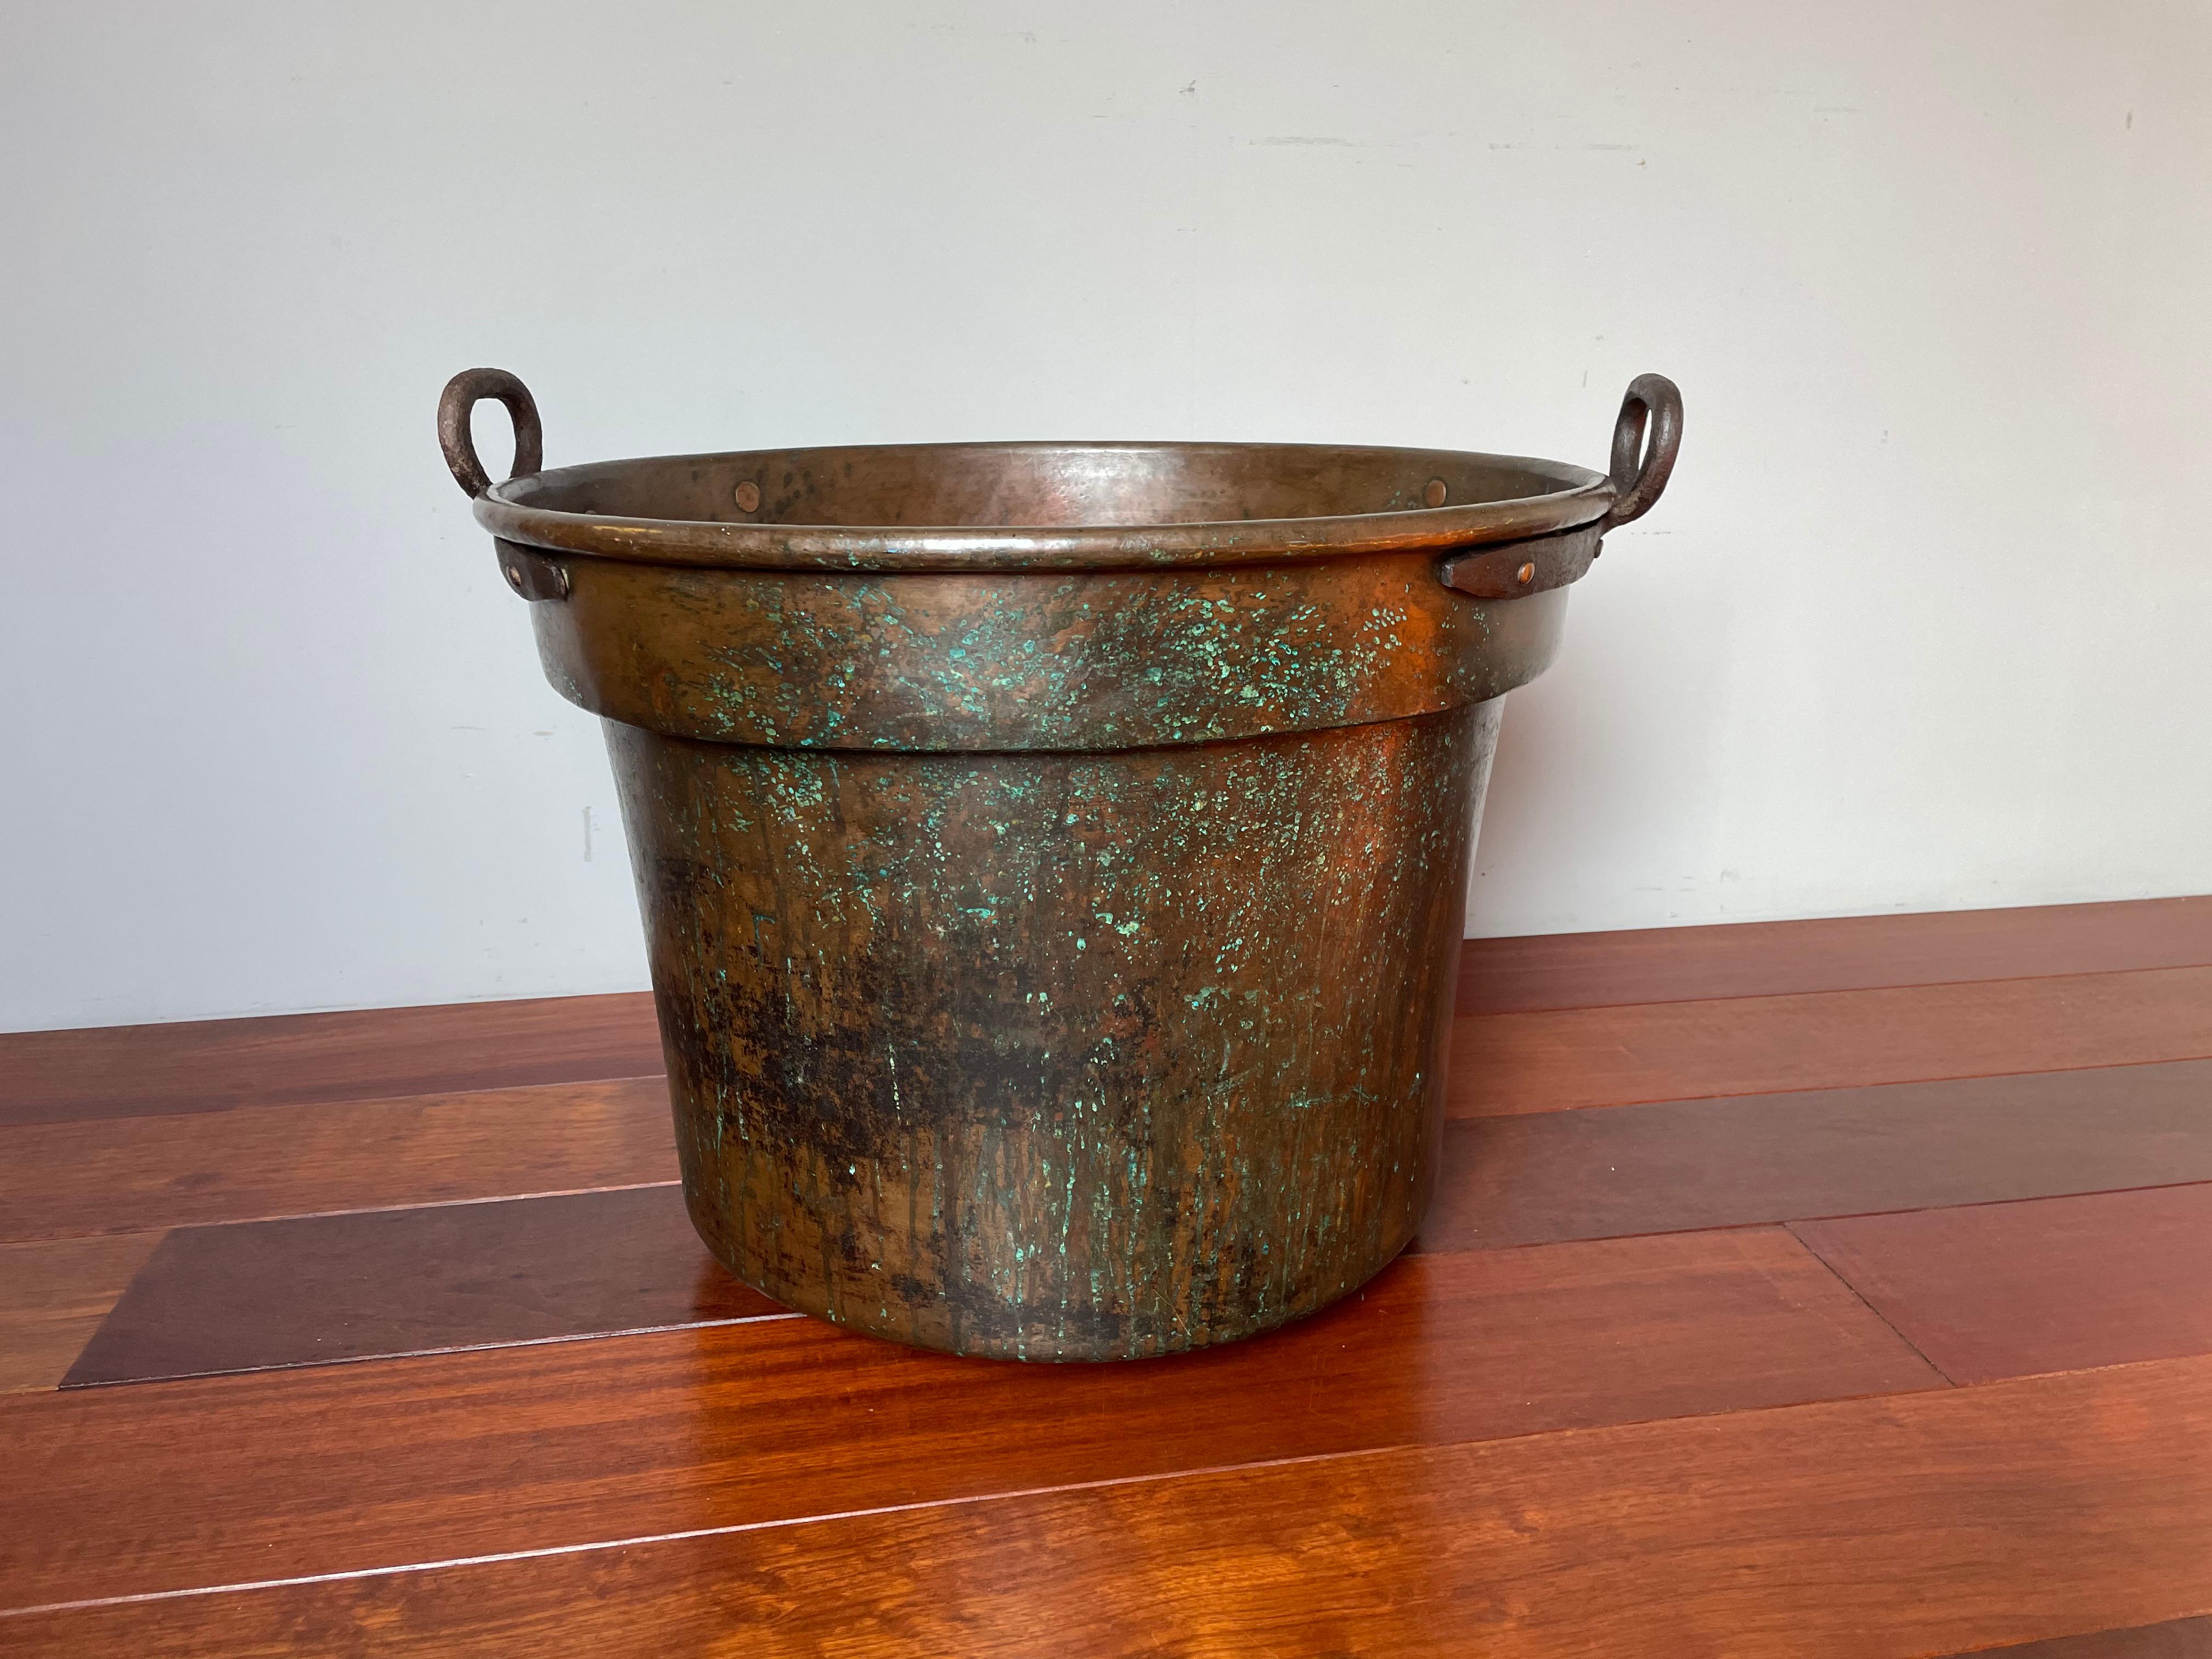 Dutch Largest Antique & Handcrafted Copper and Forged Iron Firewood Bucket or Planter